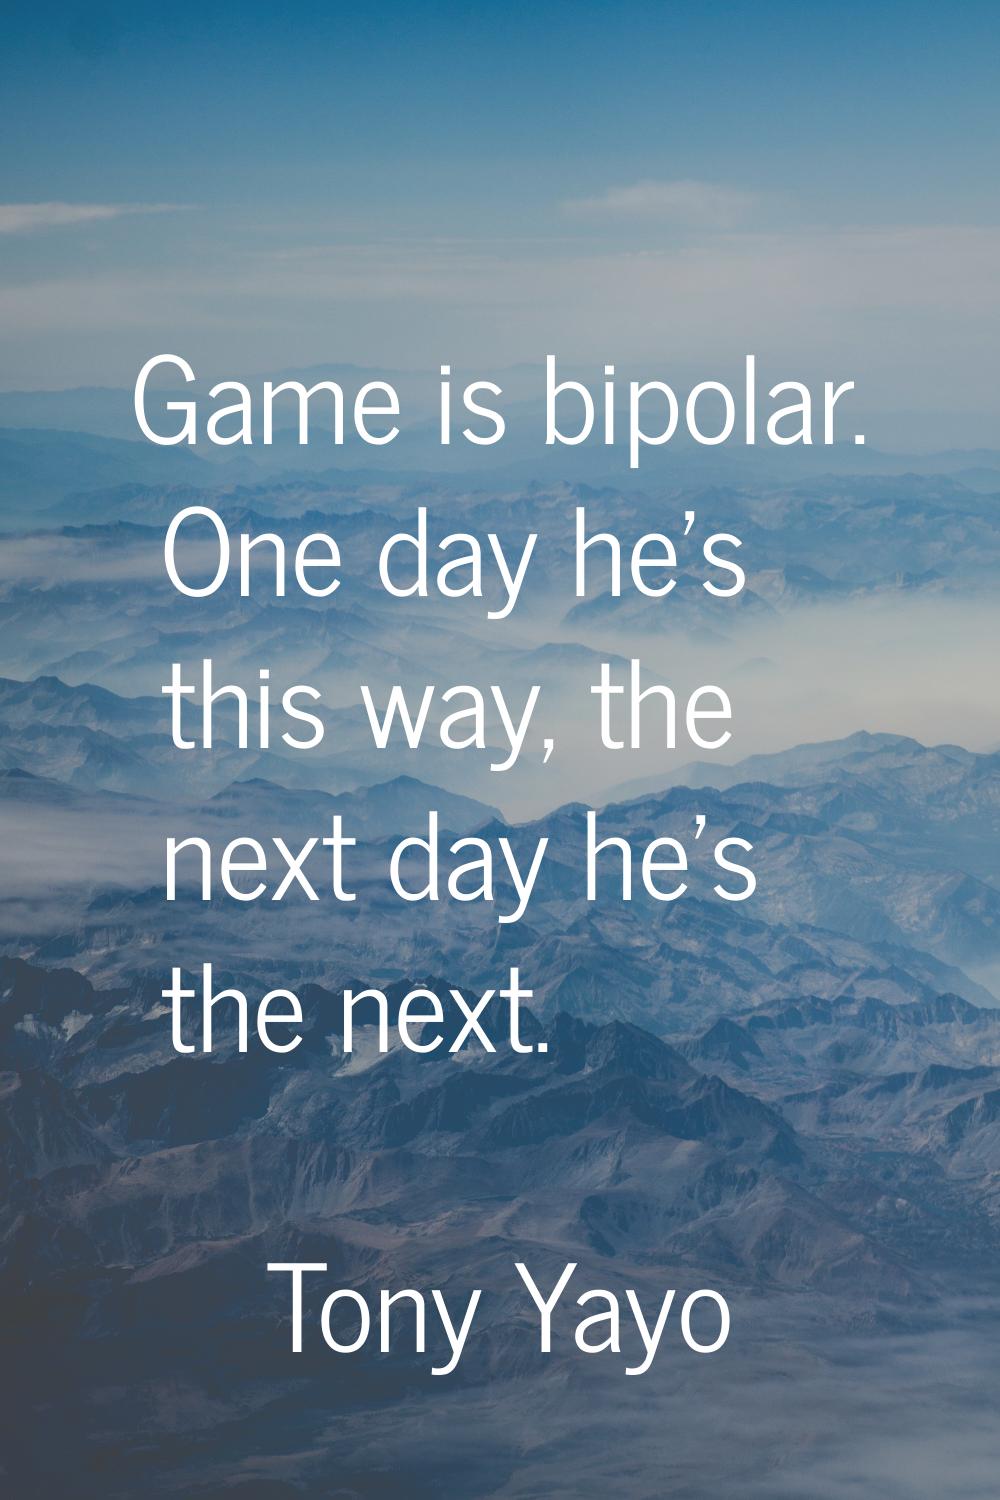 Game is bipolar. One day he's this way, the next day he's the next.